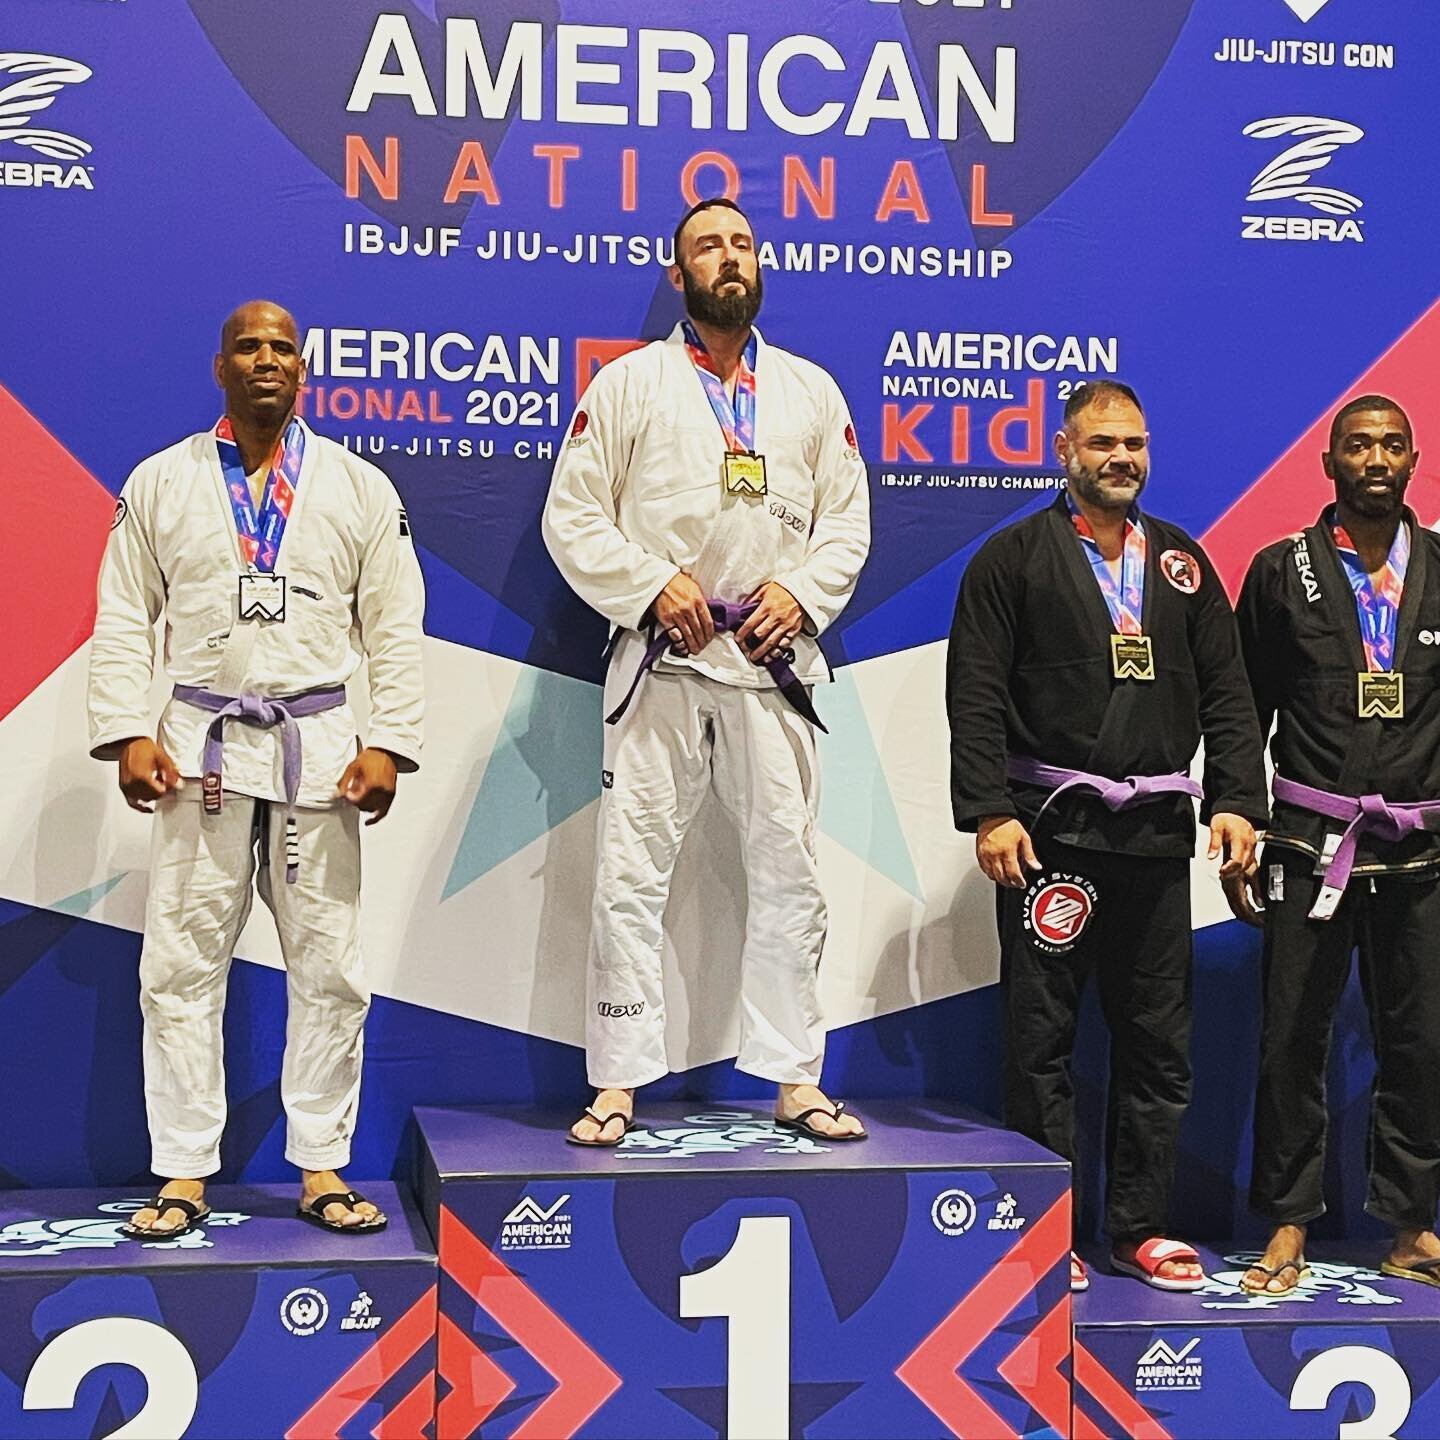 After 4 hard matches, Harvey takes silver in the Open weigh division! So proud of this guy! #openweightclass #checkmathq #checkmatcorona #tacaefitness #ibjjfamericannationals